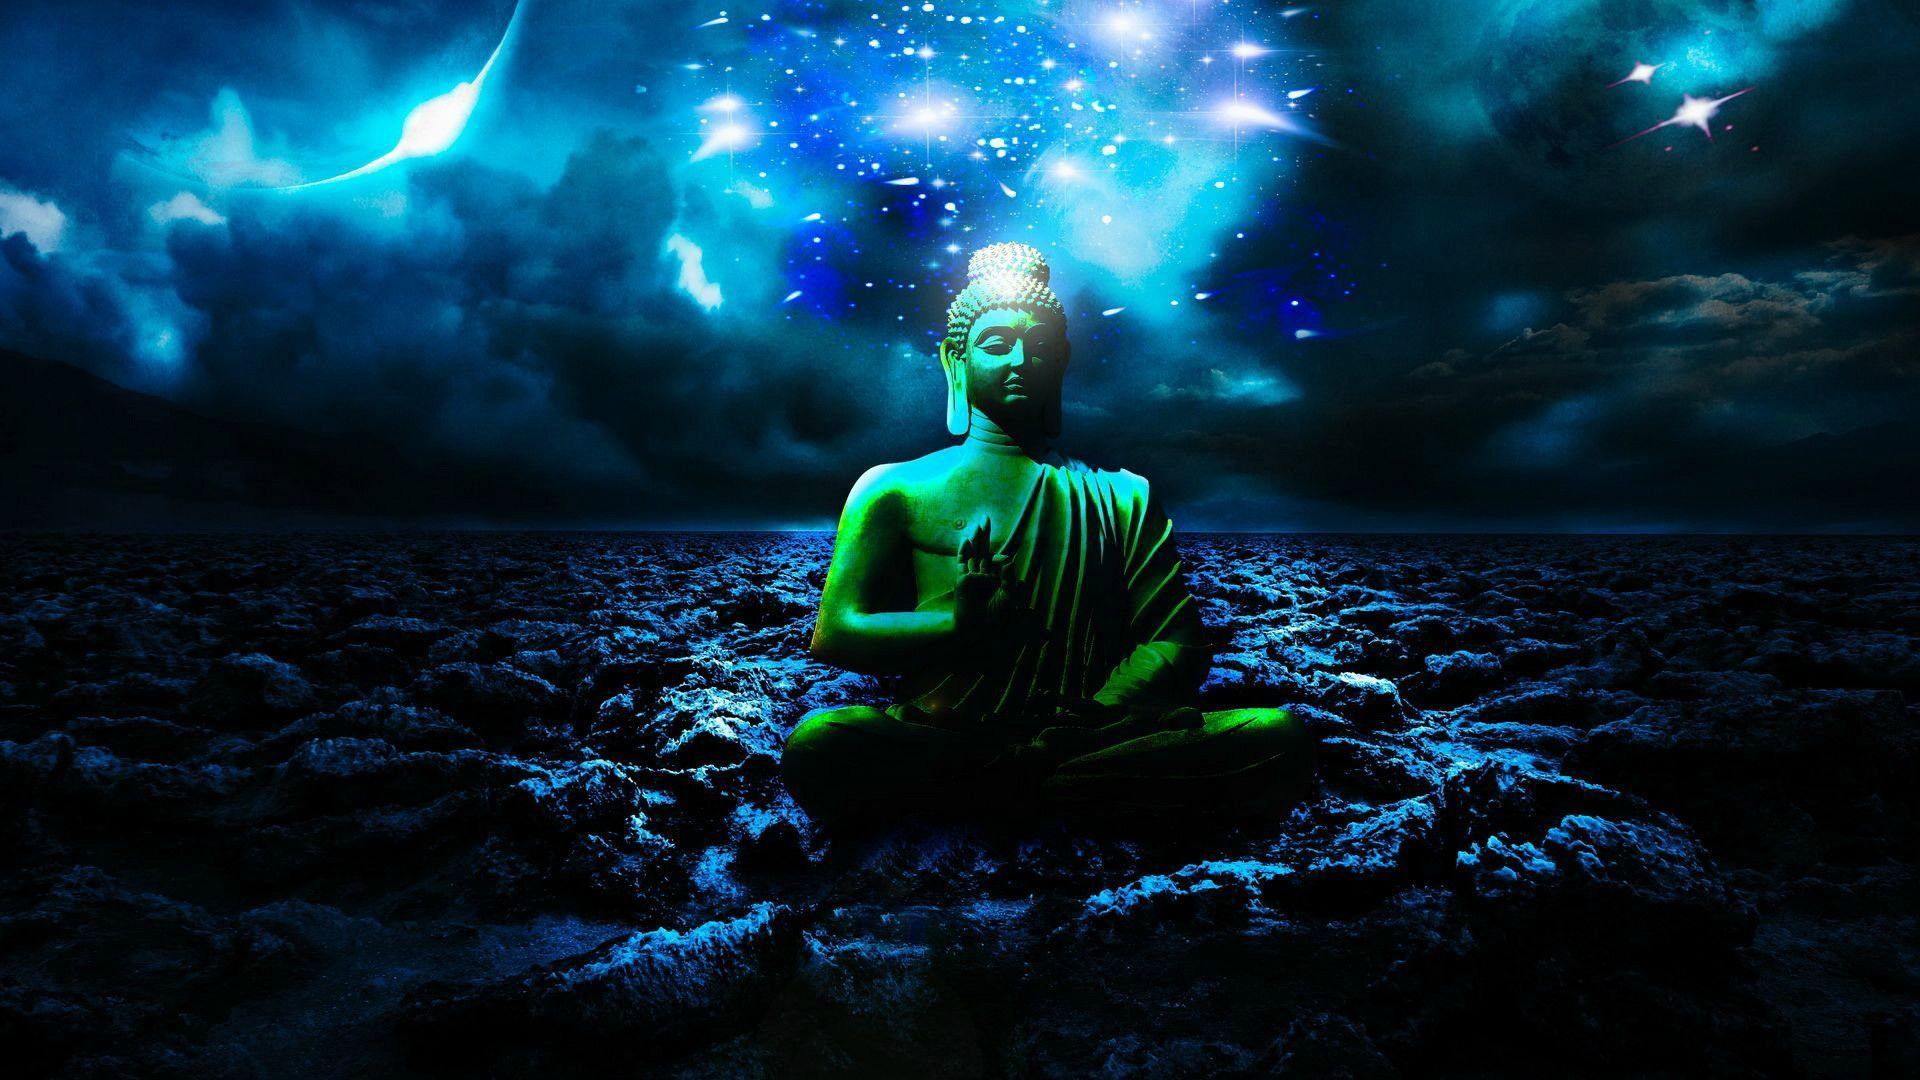 Buddha Wallpaper, photo, image & picture free download